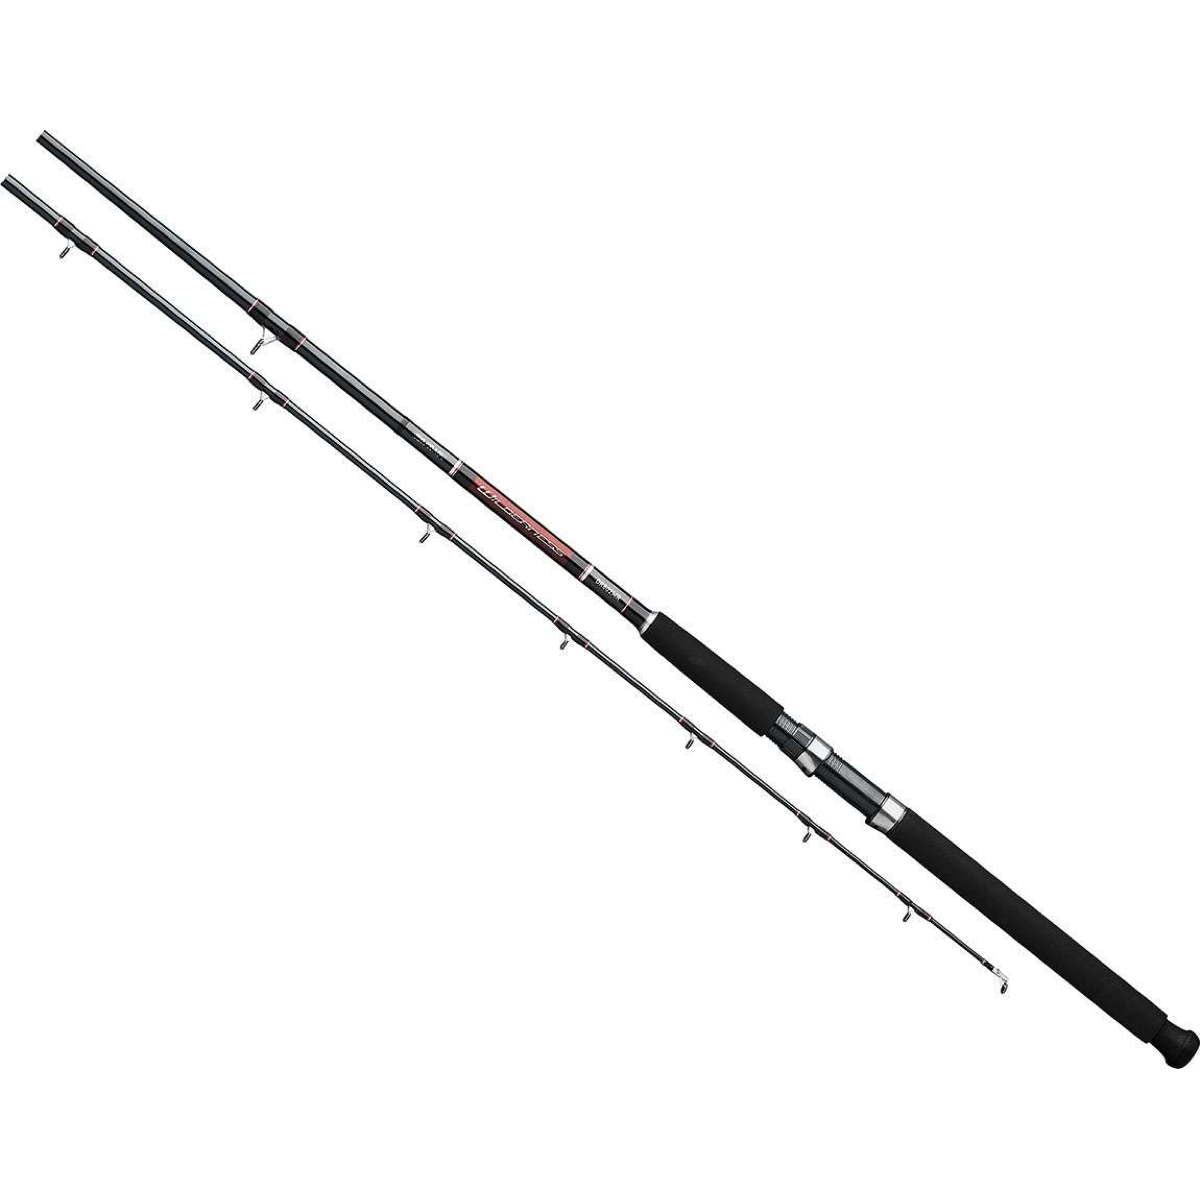 Photo of Daiwa Wilderness Downrigger Trolling Rod for sale at United Tackle Shops.